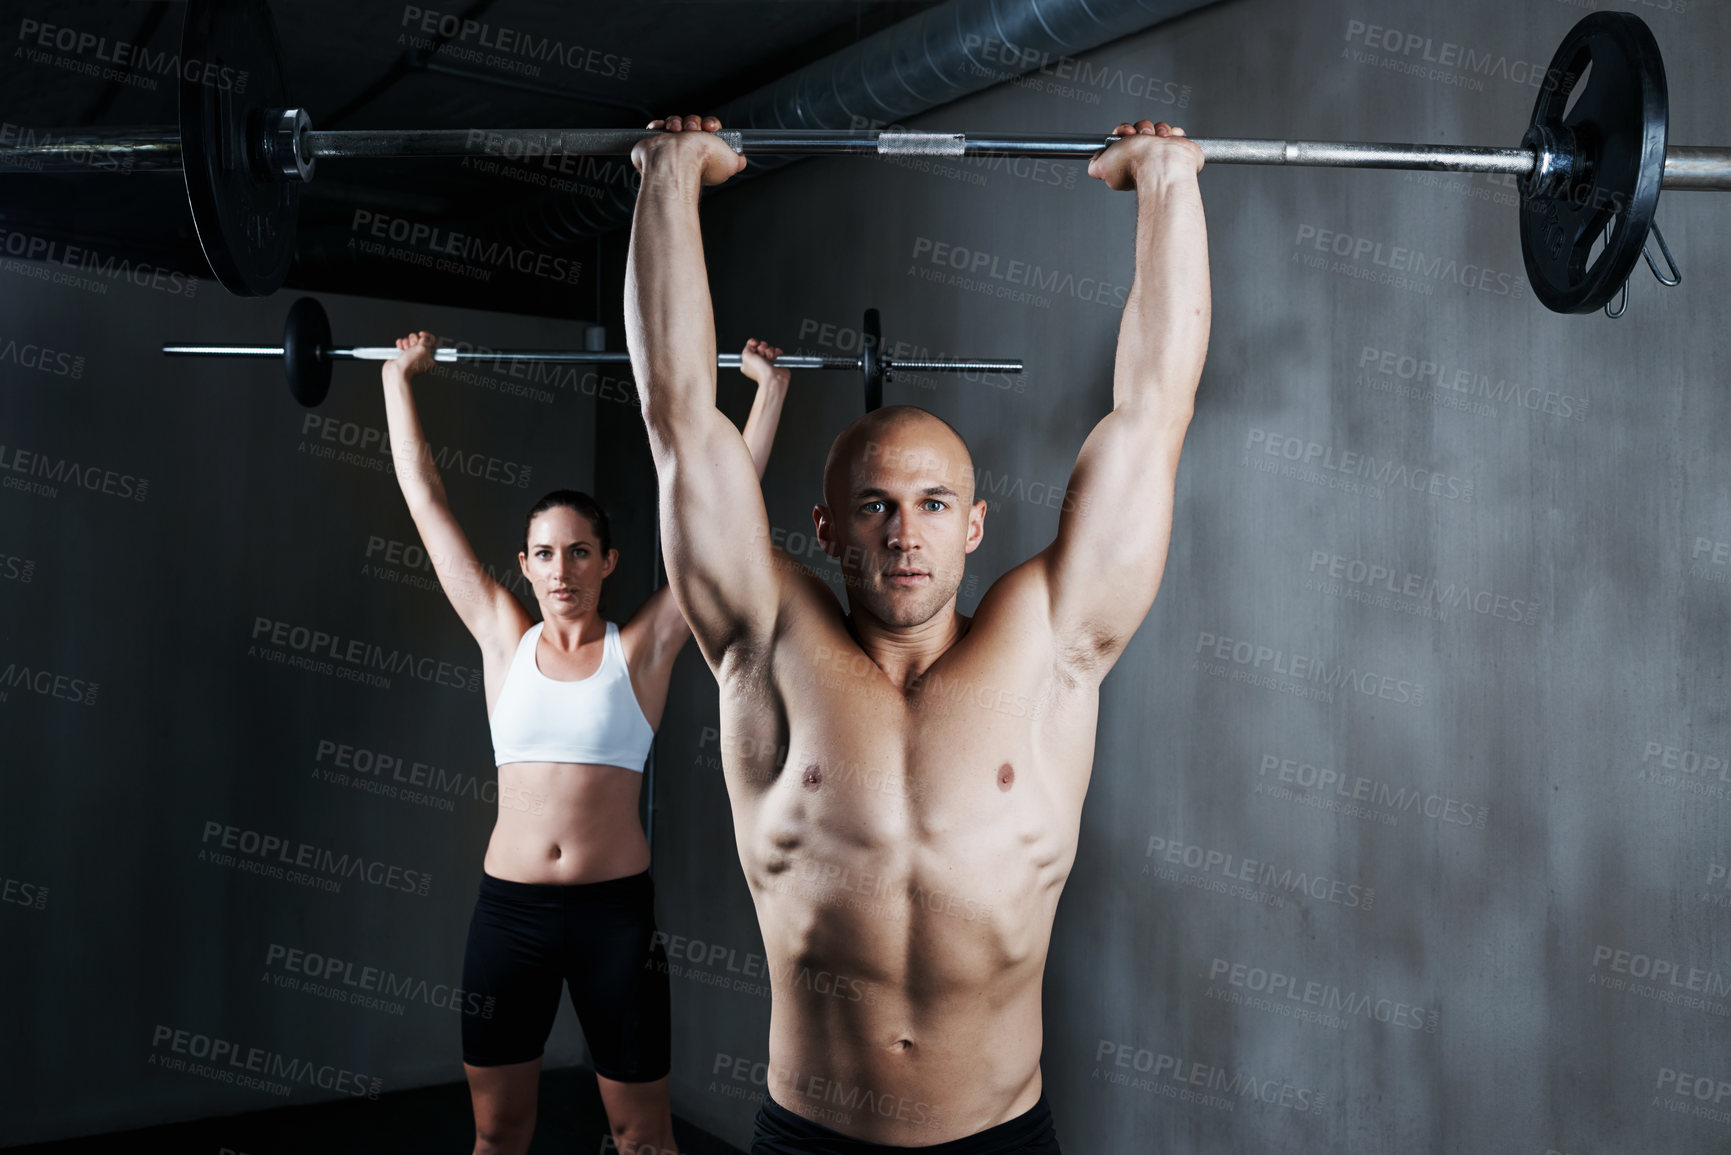 Buy stock photo Cropped shot of a man and woman working out with barbells